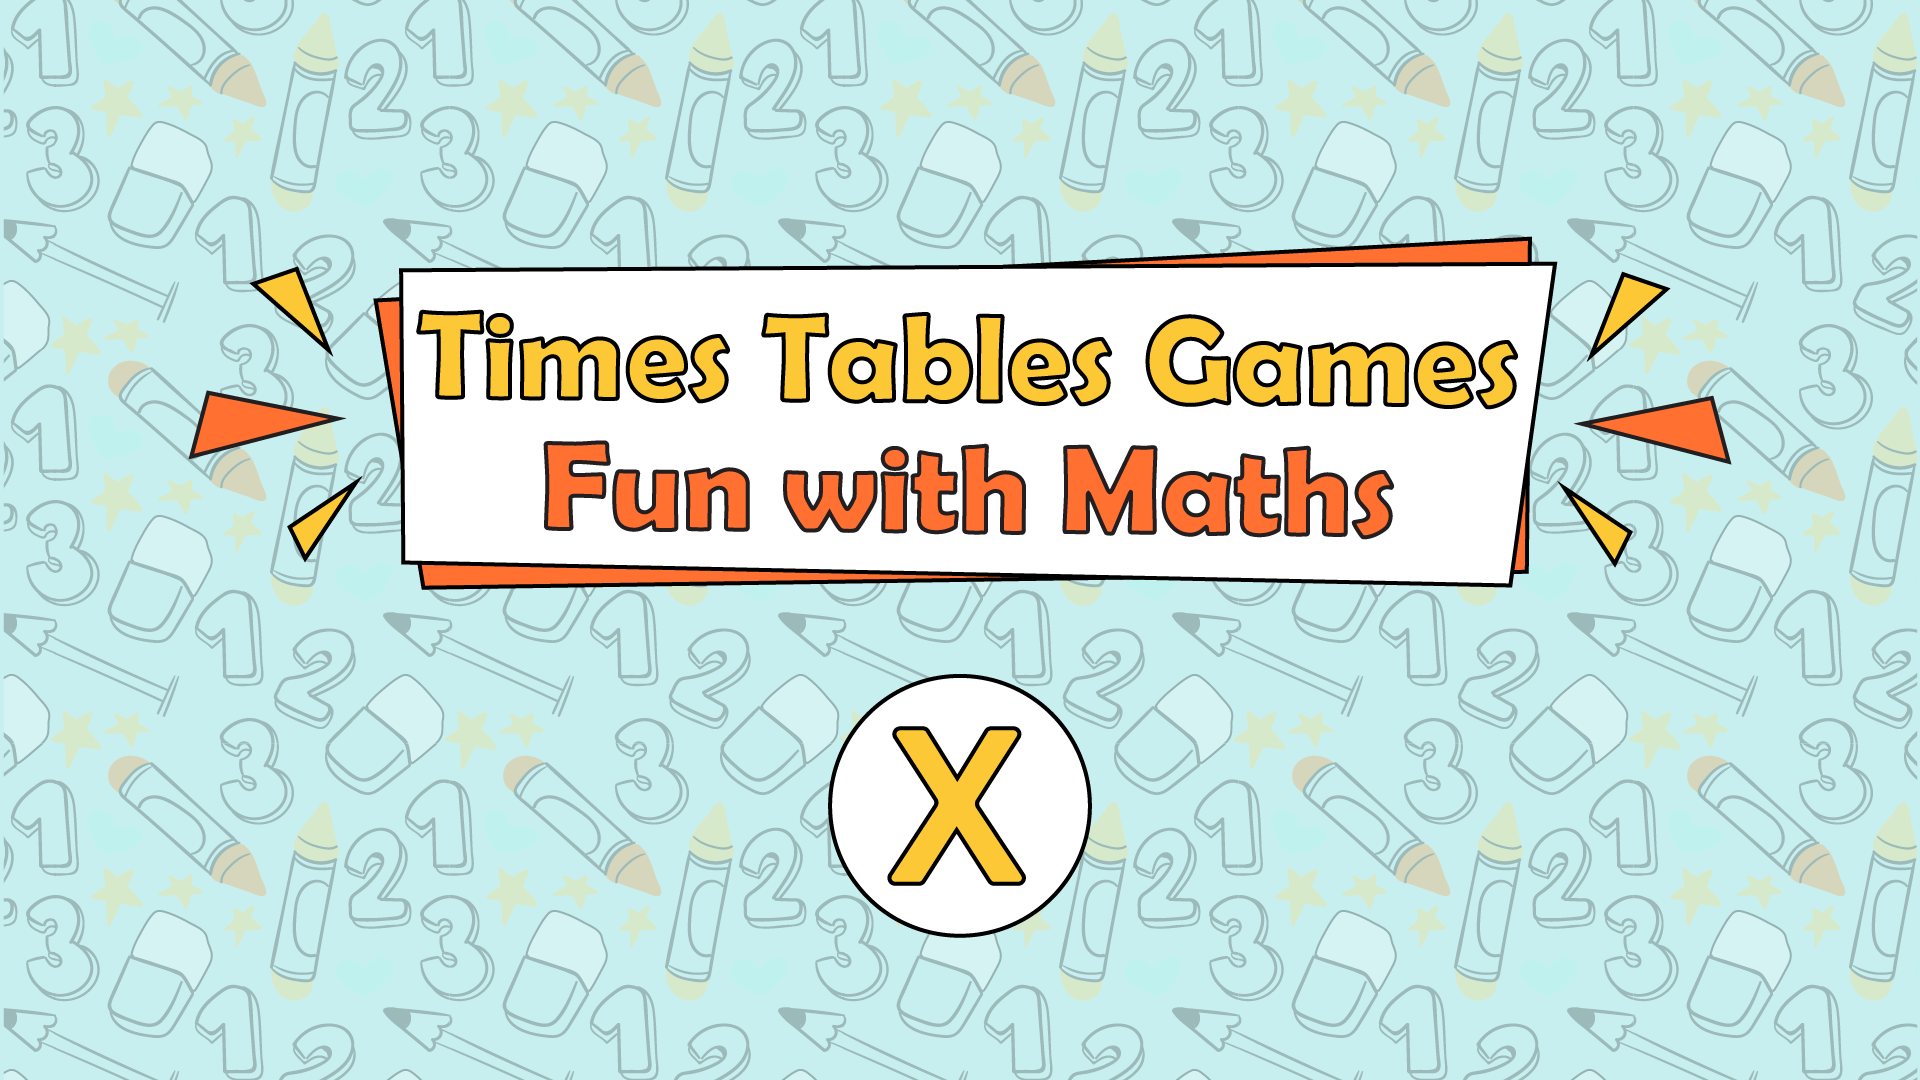 Times Tables Games: Fun with Maths